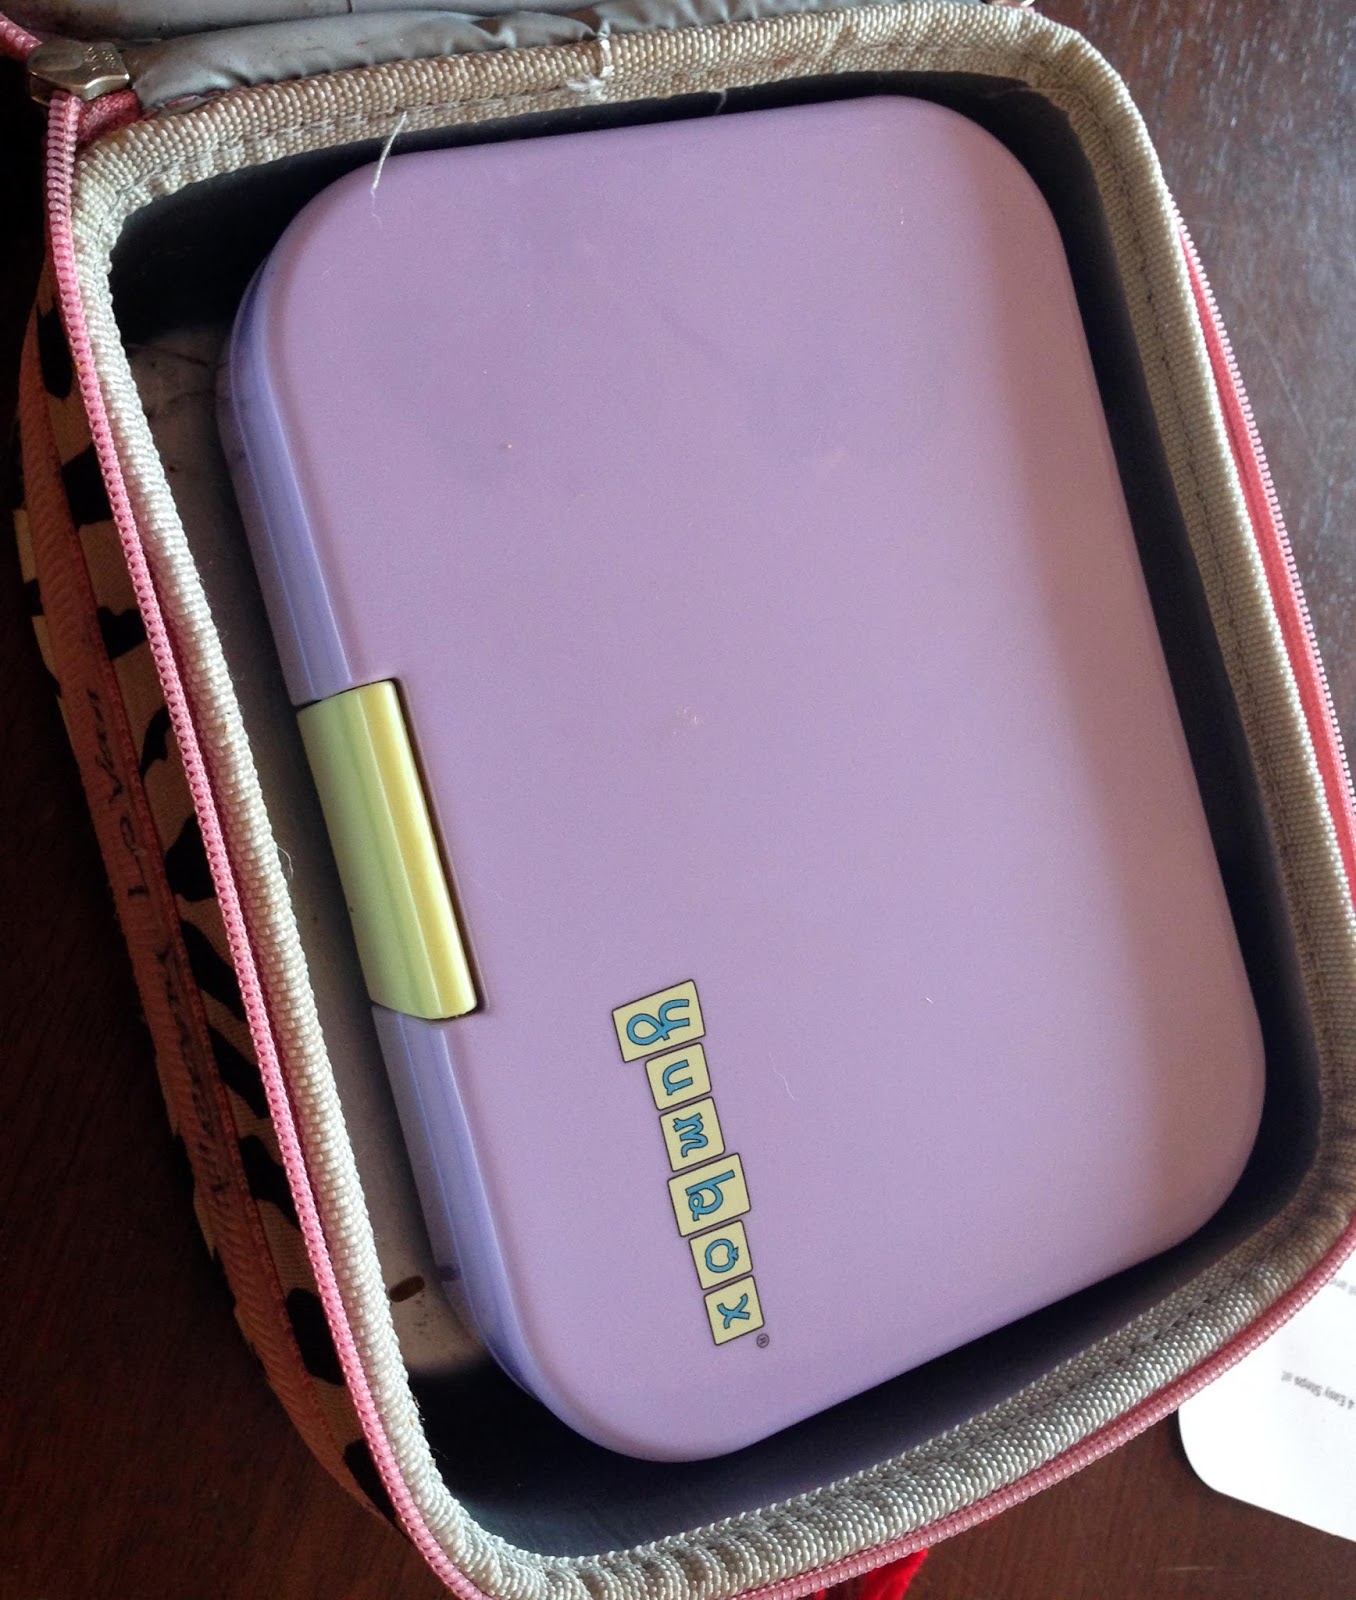 Yumbox - We love seeing what bags you're using to pack your Yumbox